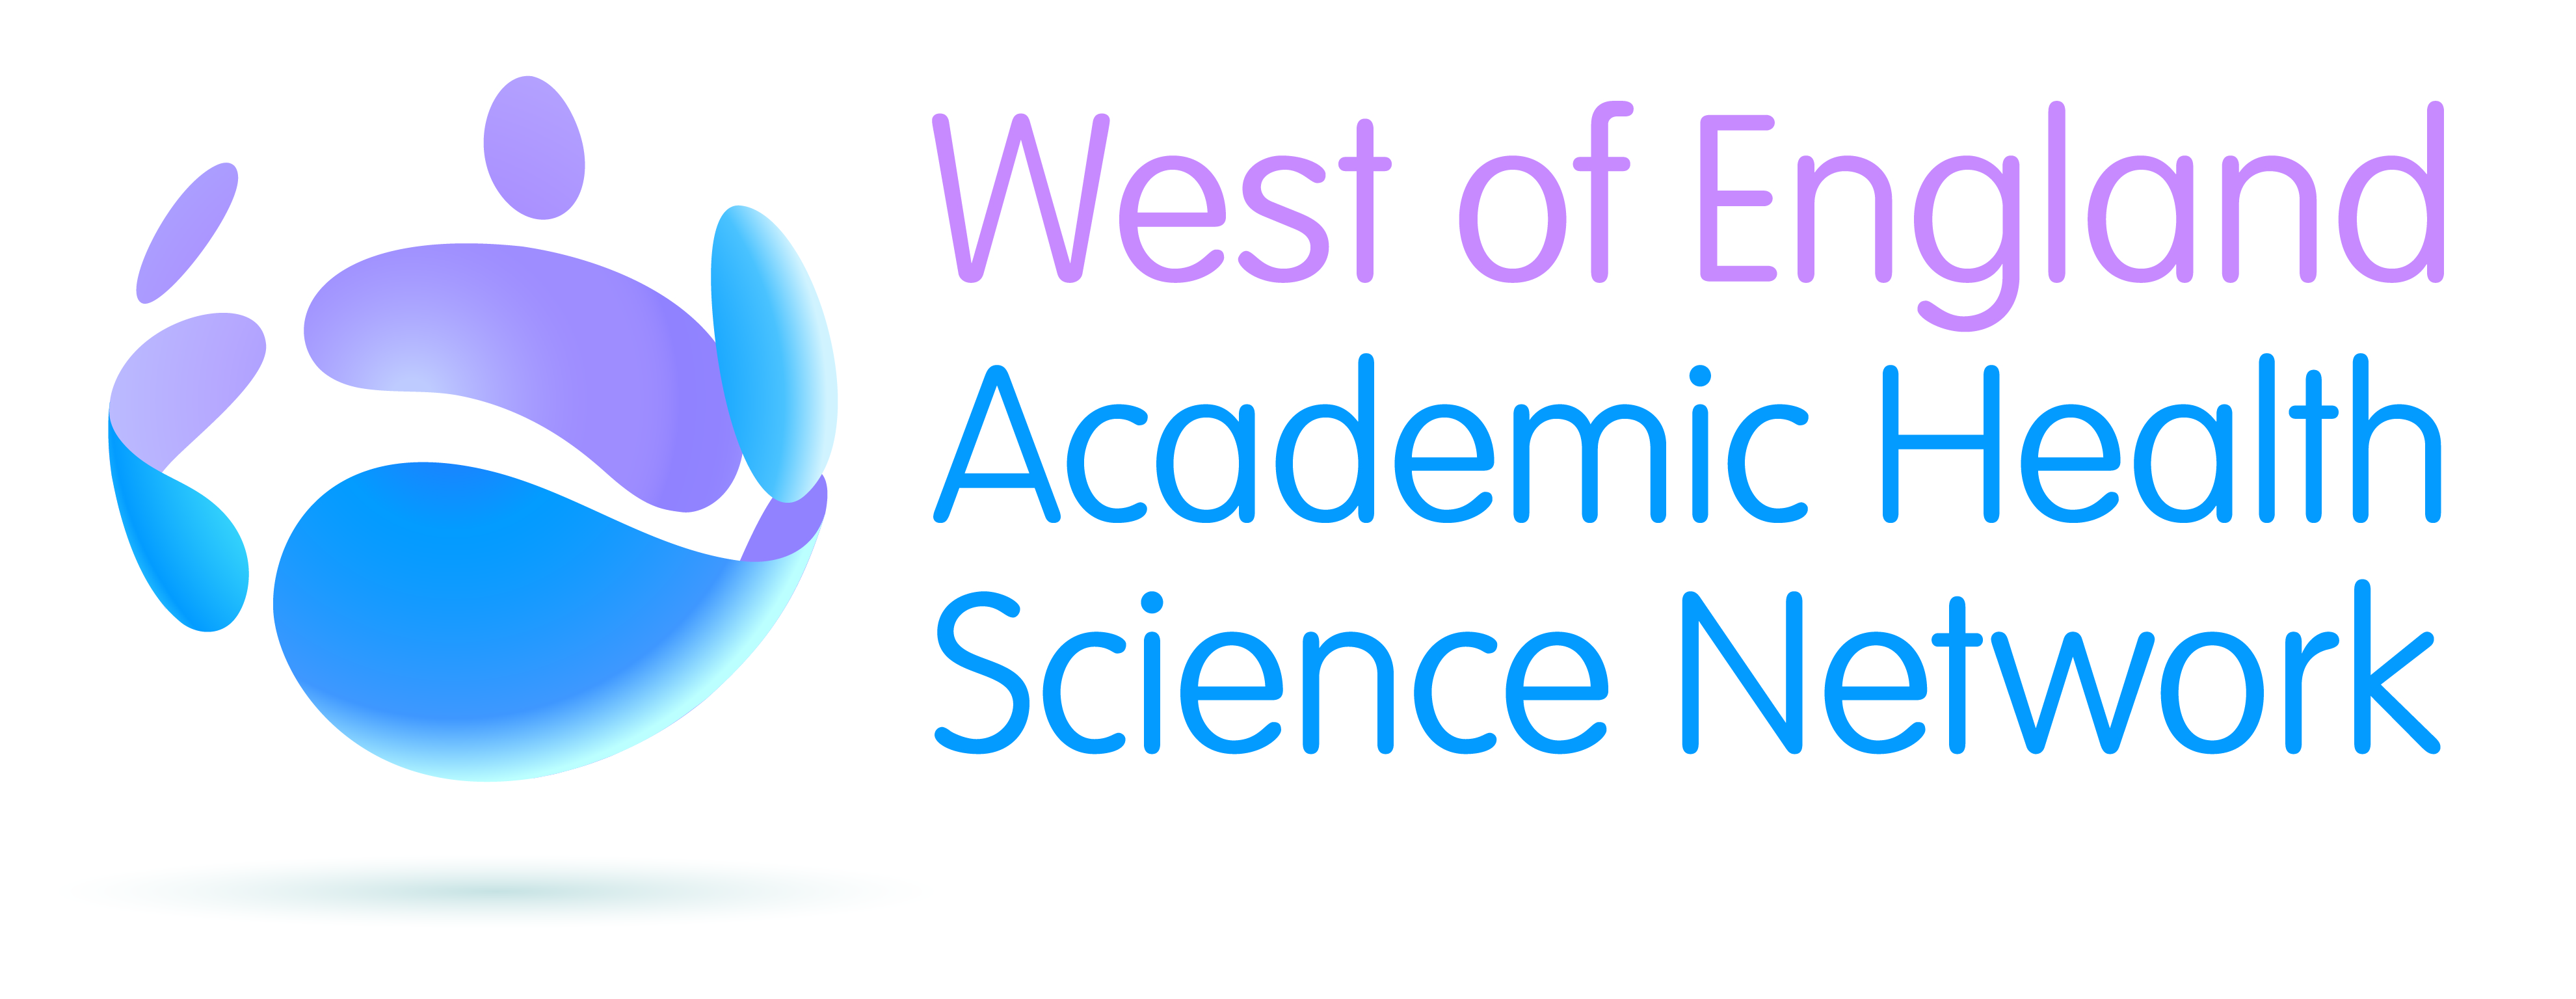 West of England Academic Health Science Network Logo